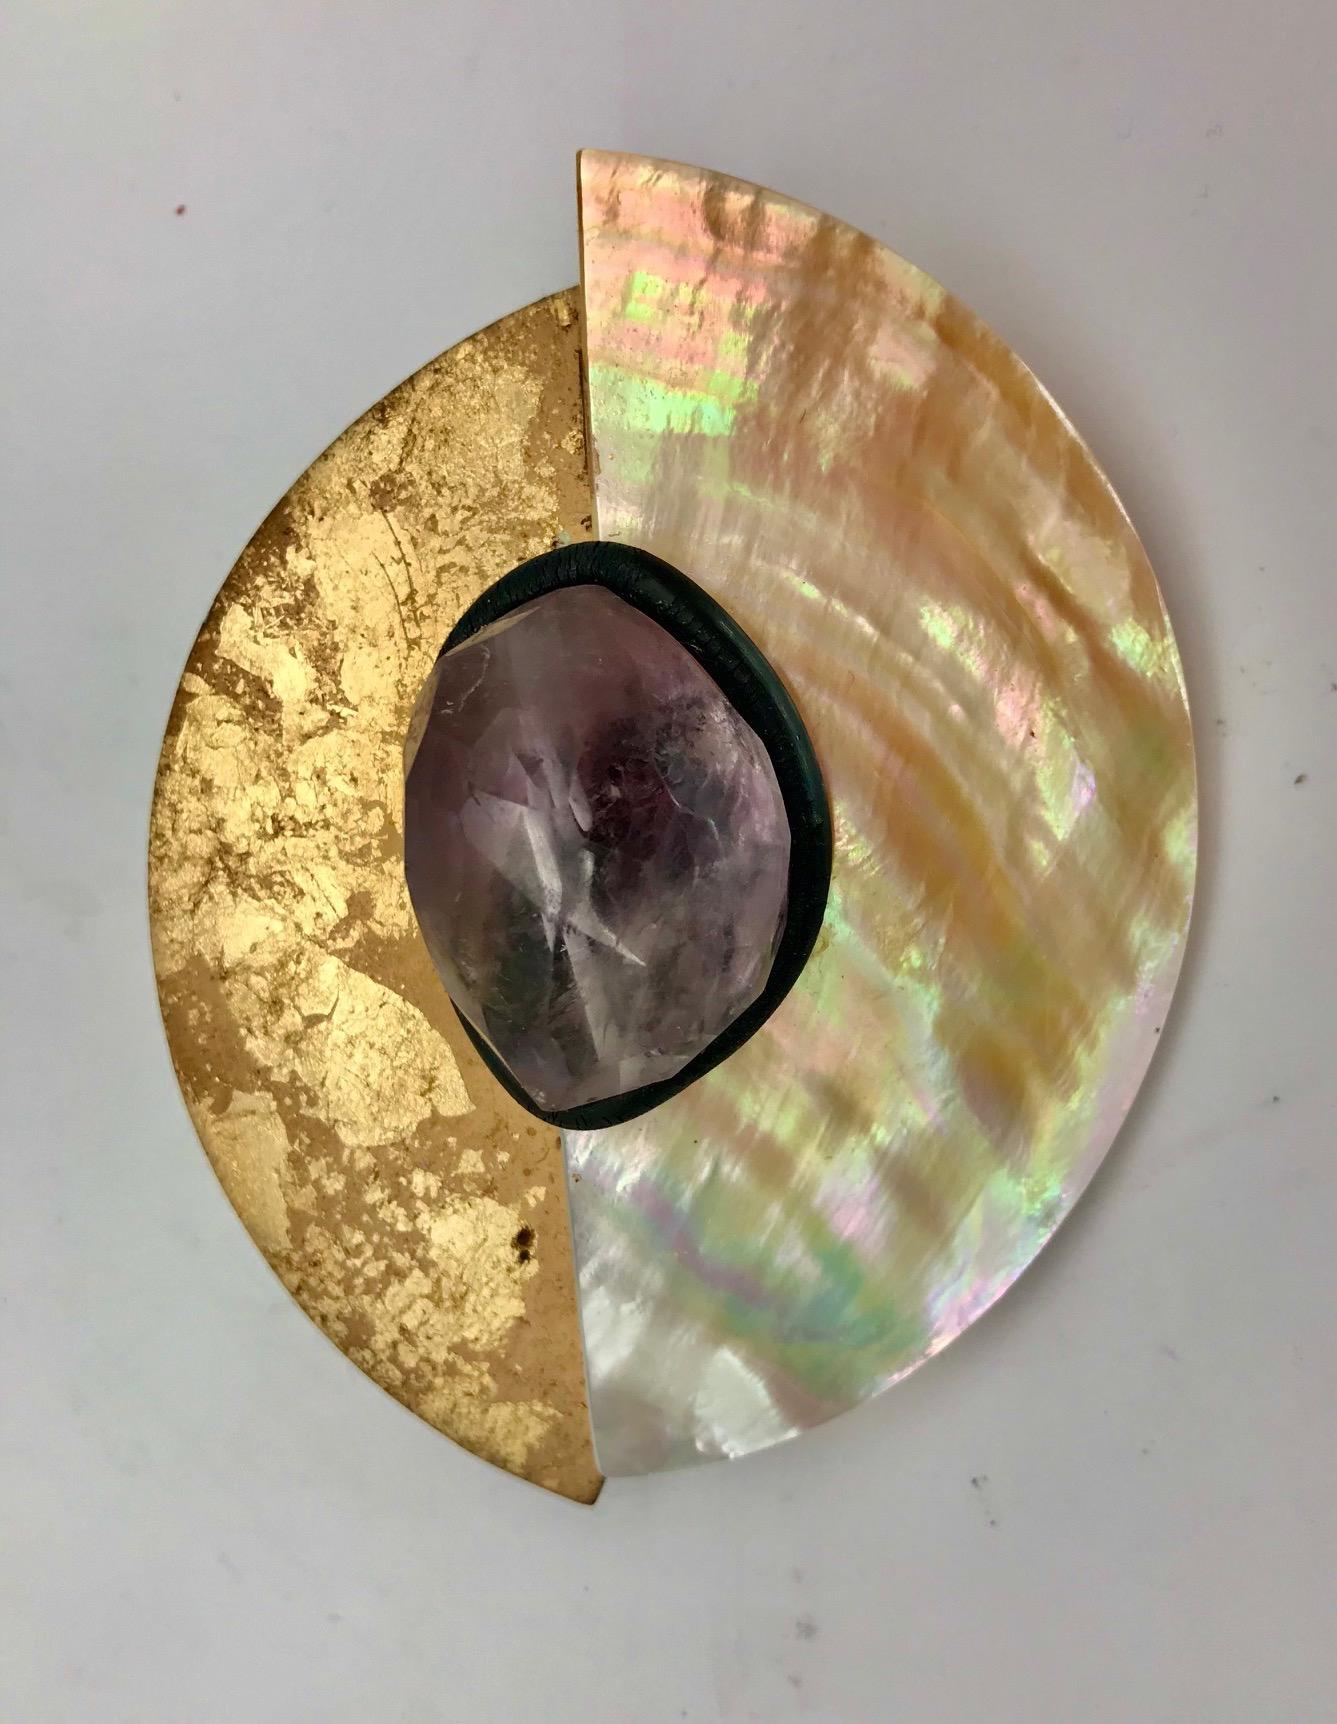  Brooch white/gold Mother of Pearl with Amethyst ;consists of two half circles arranged in an elypse like design lower one having 24 carat gold leaf applied on the surface. The center accent is 1.5 long large faceted Amethyst
framed in rubber tube.